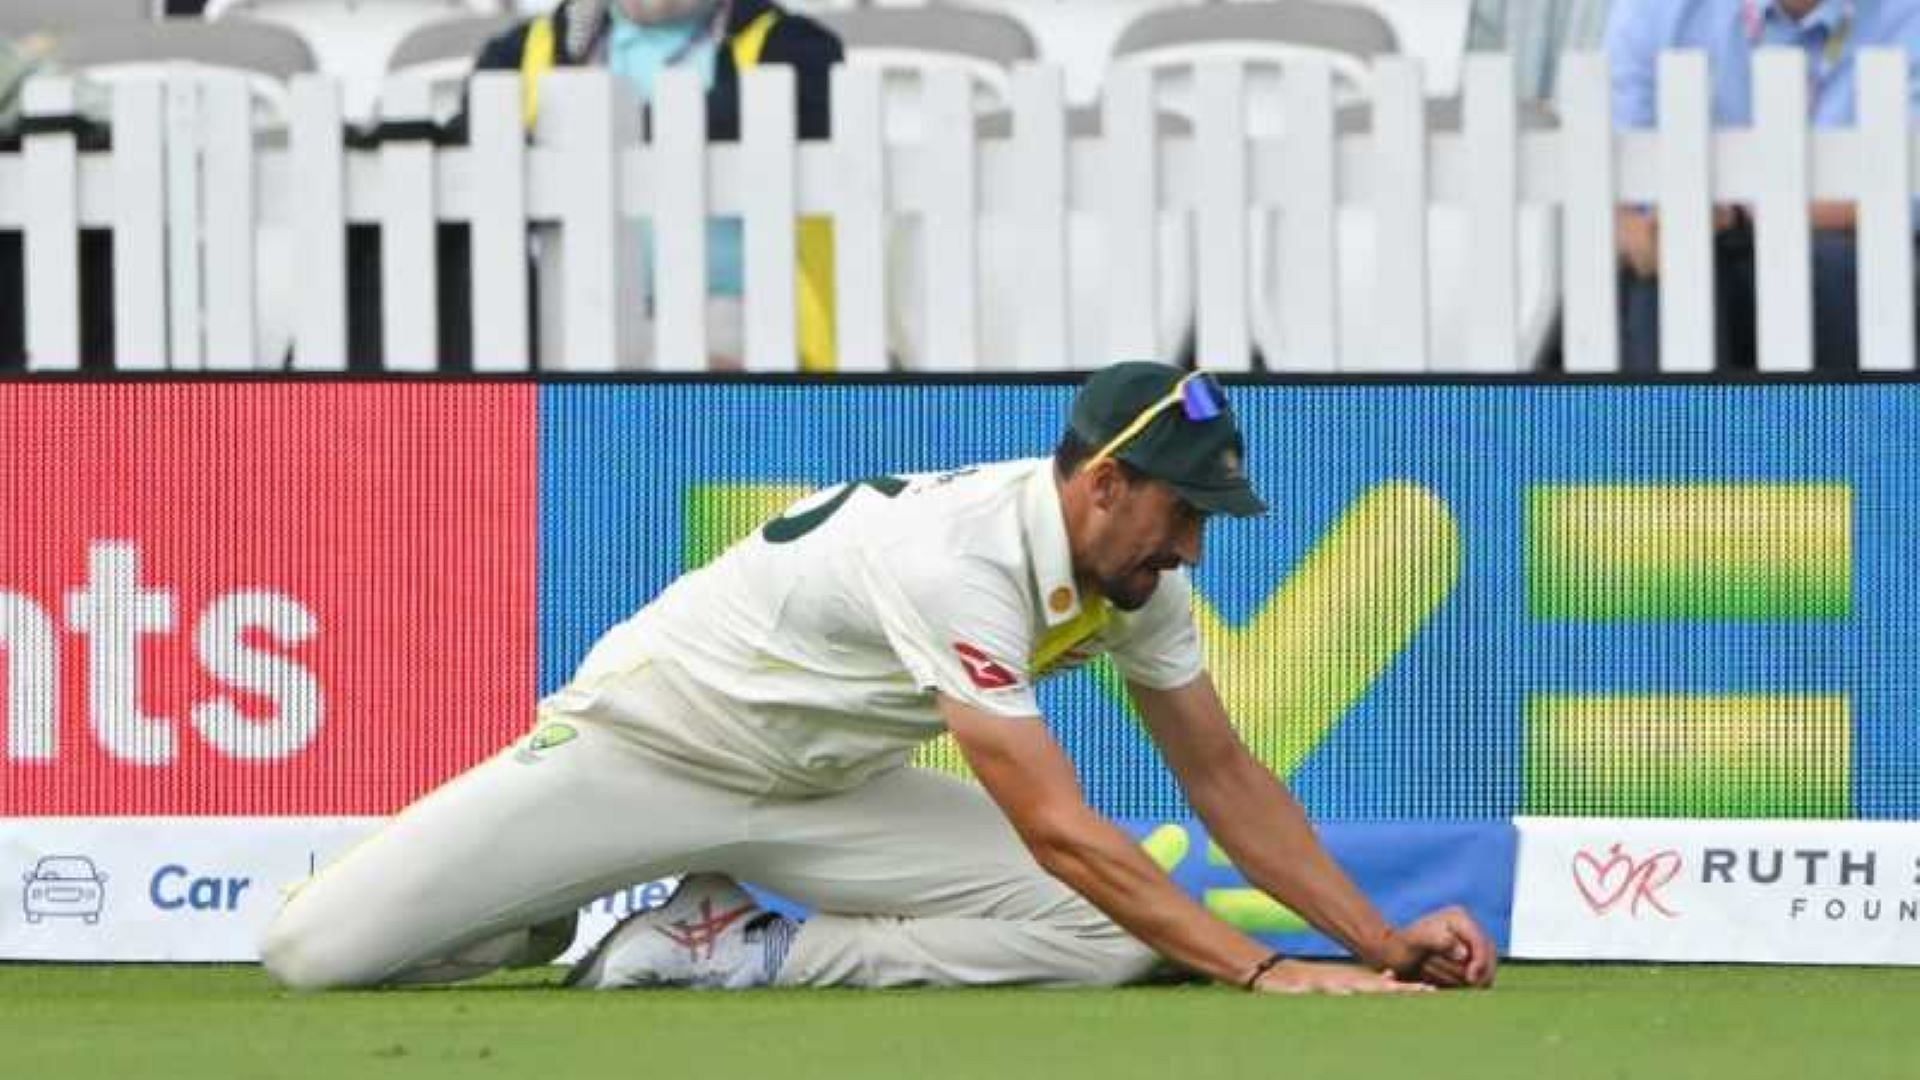 Mitchell Starc taking the catch of Ben Duckett that was later overturned